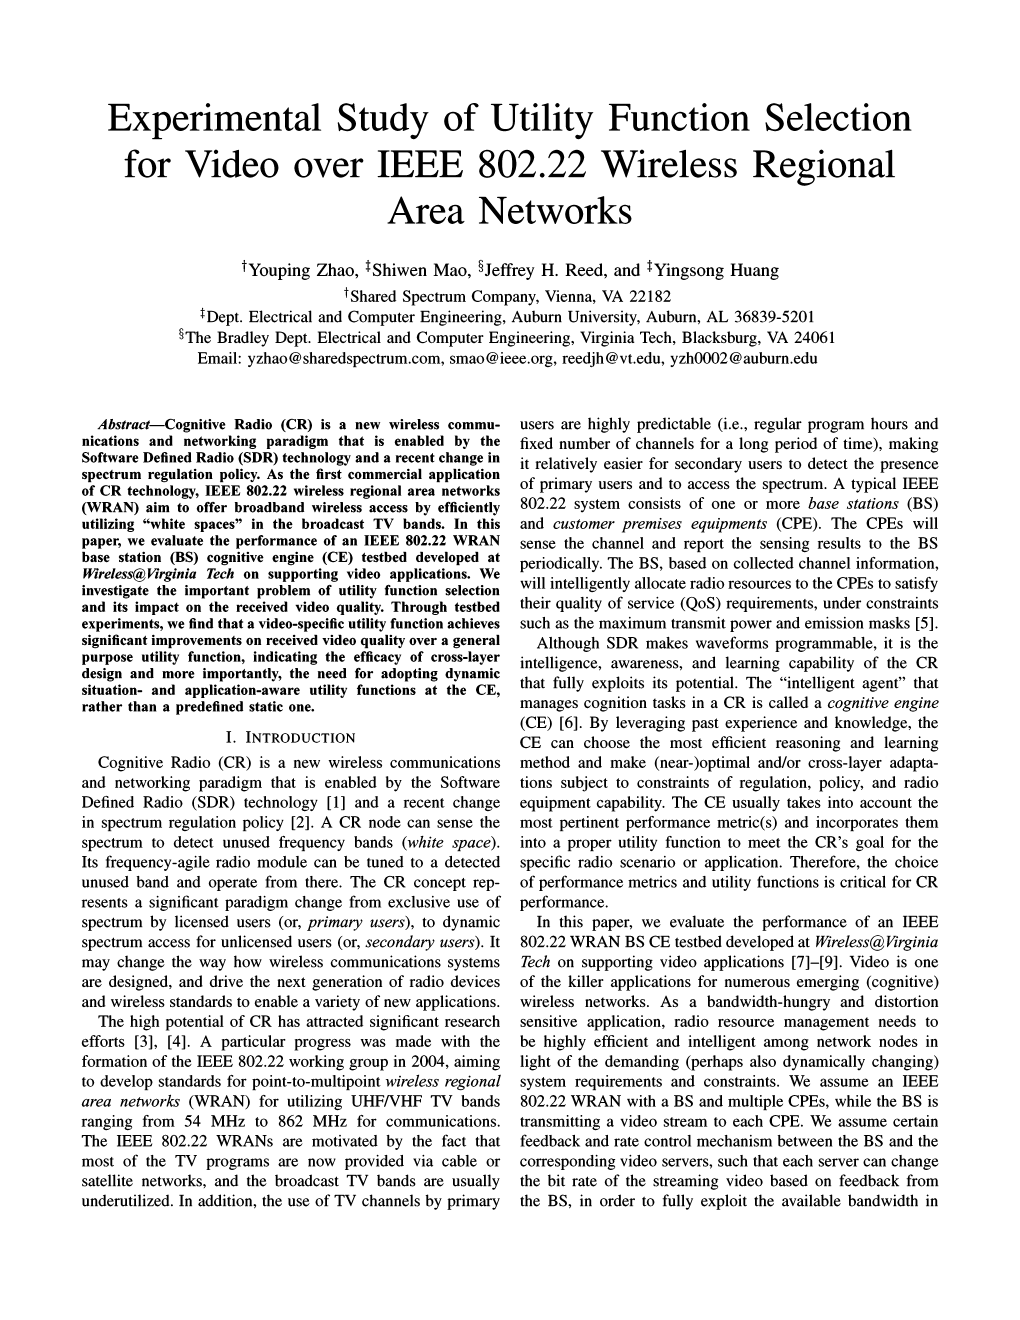 Experimental Study of Utility Function Selection for Video Over IEEE 802.22 Wireless Regional Area Networks